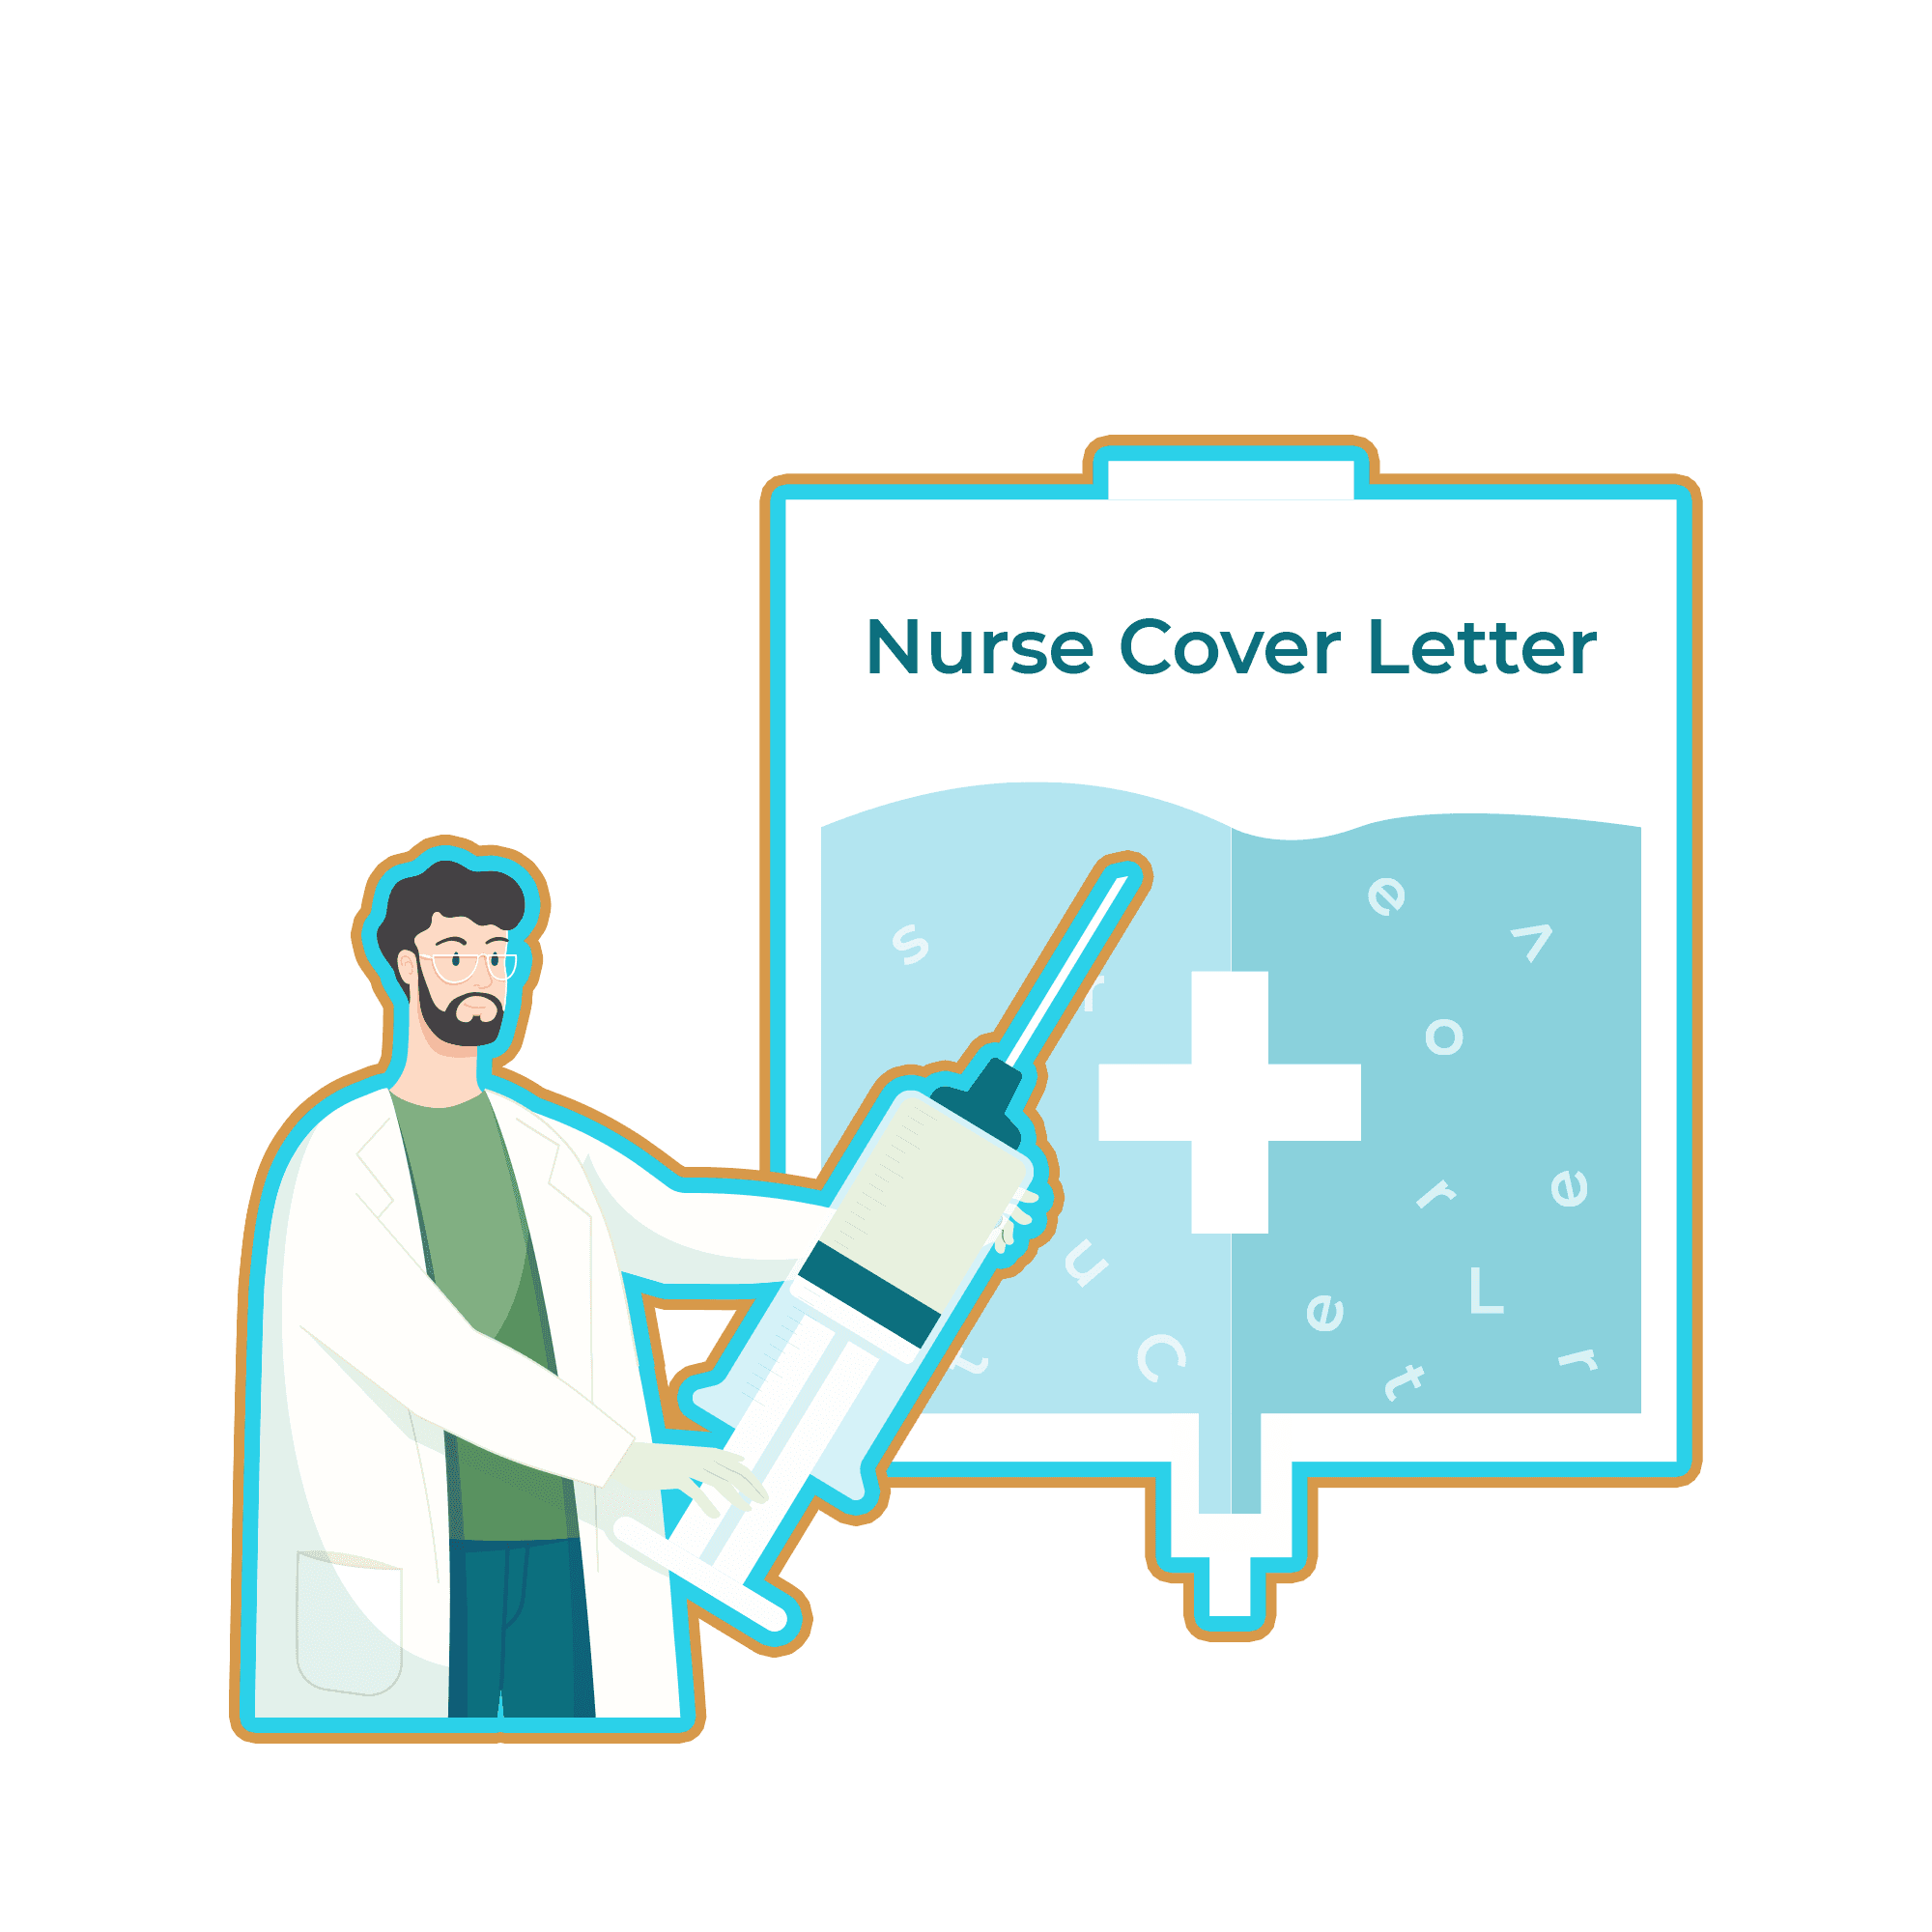 Nurse Cover Letter: Examples, Templates, Writing Tips